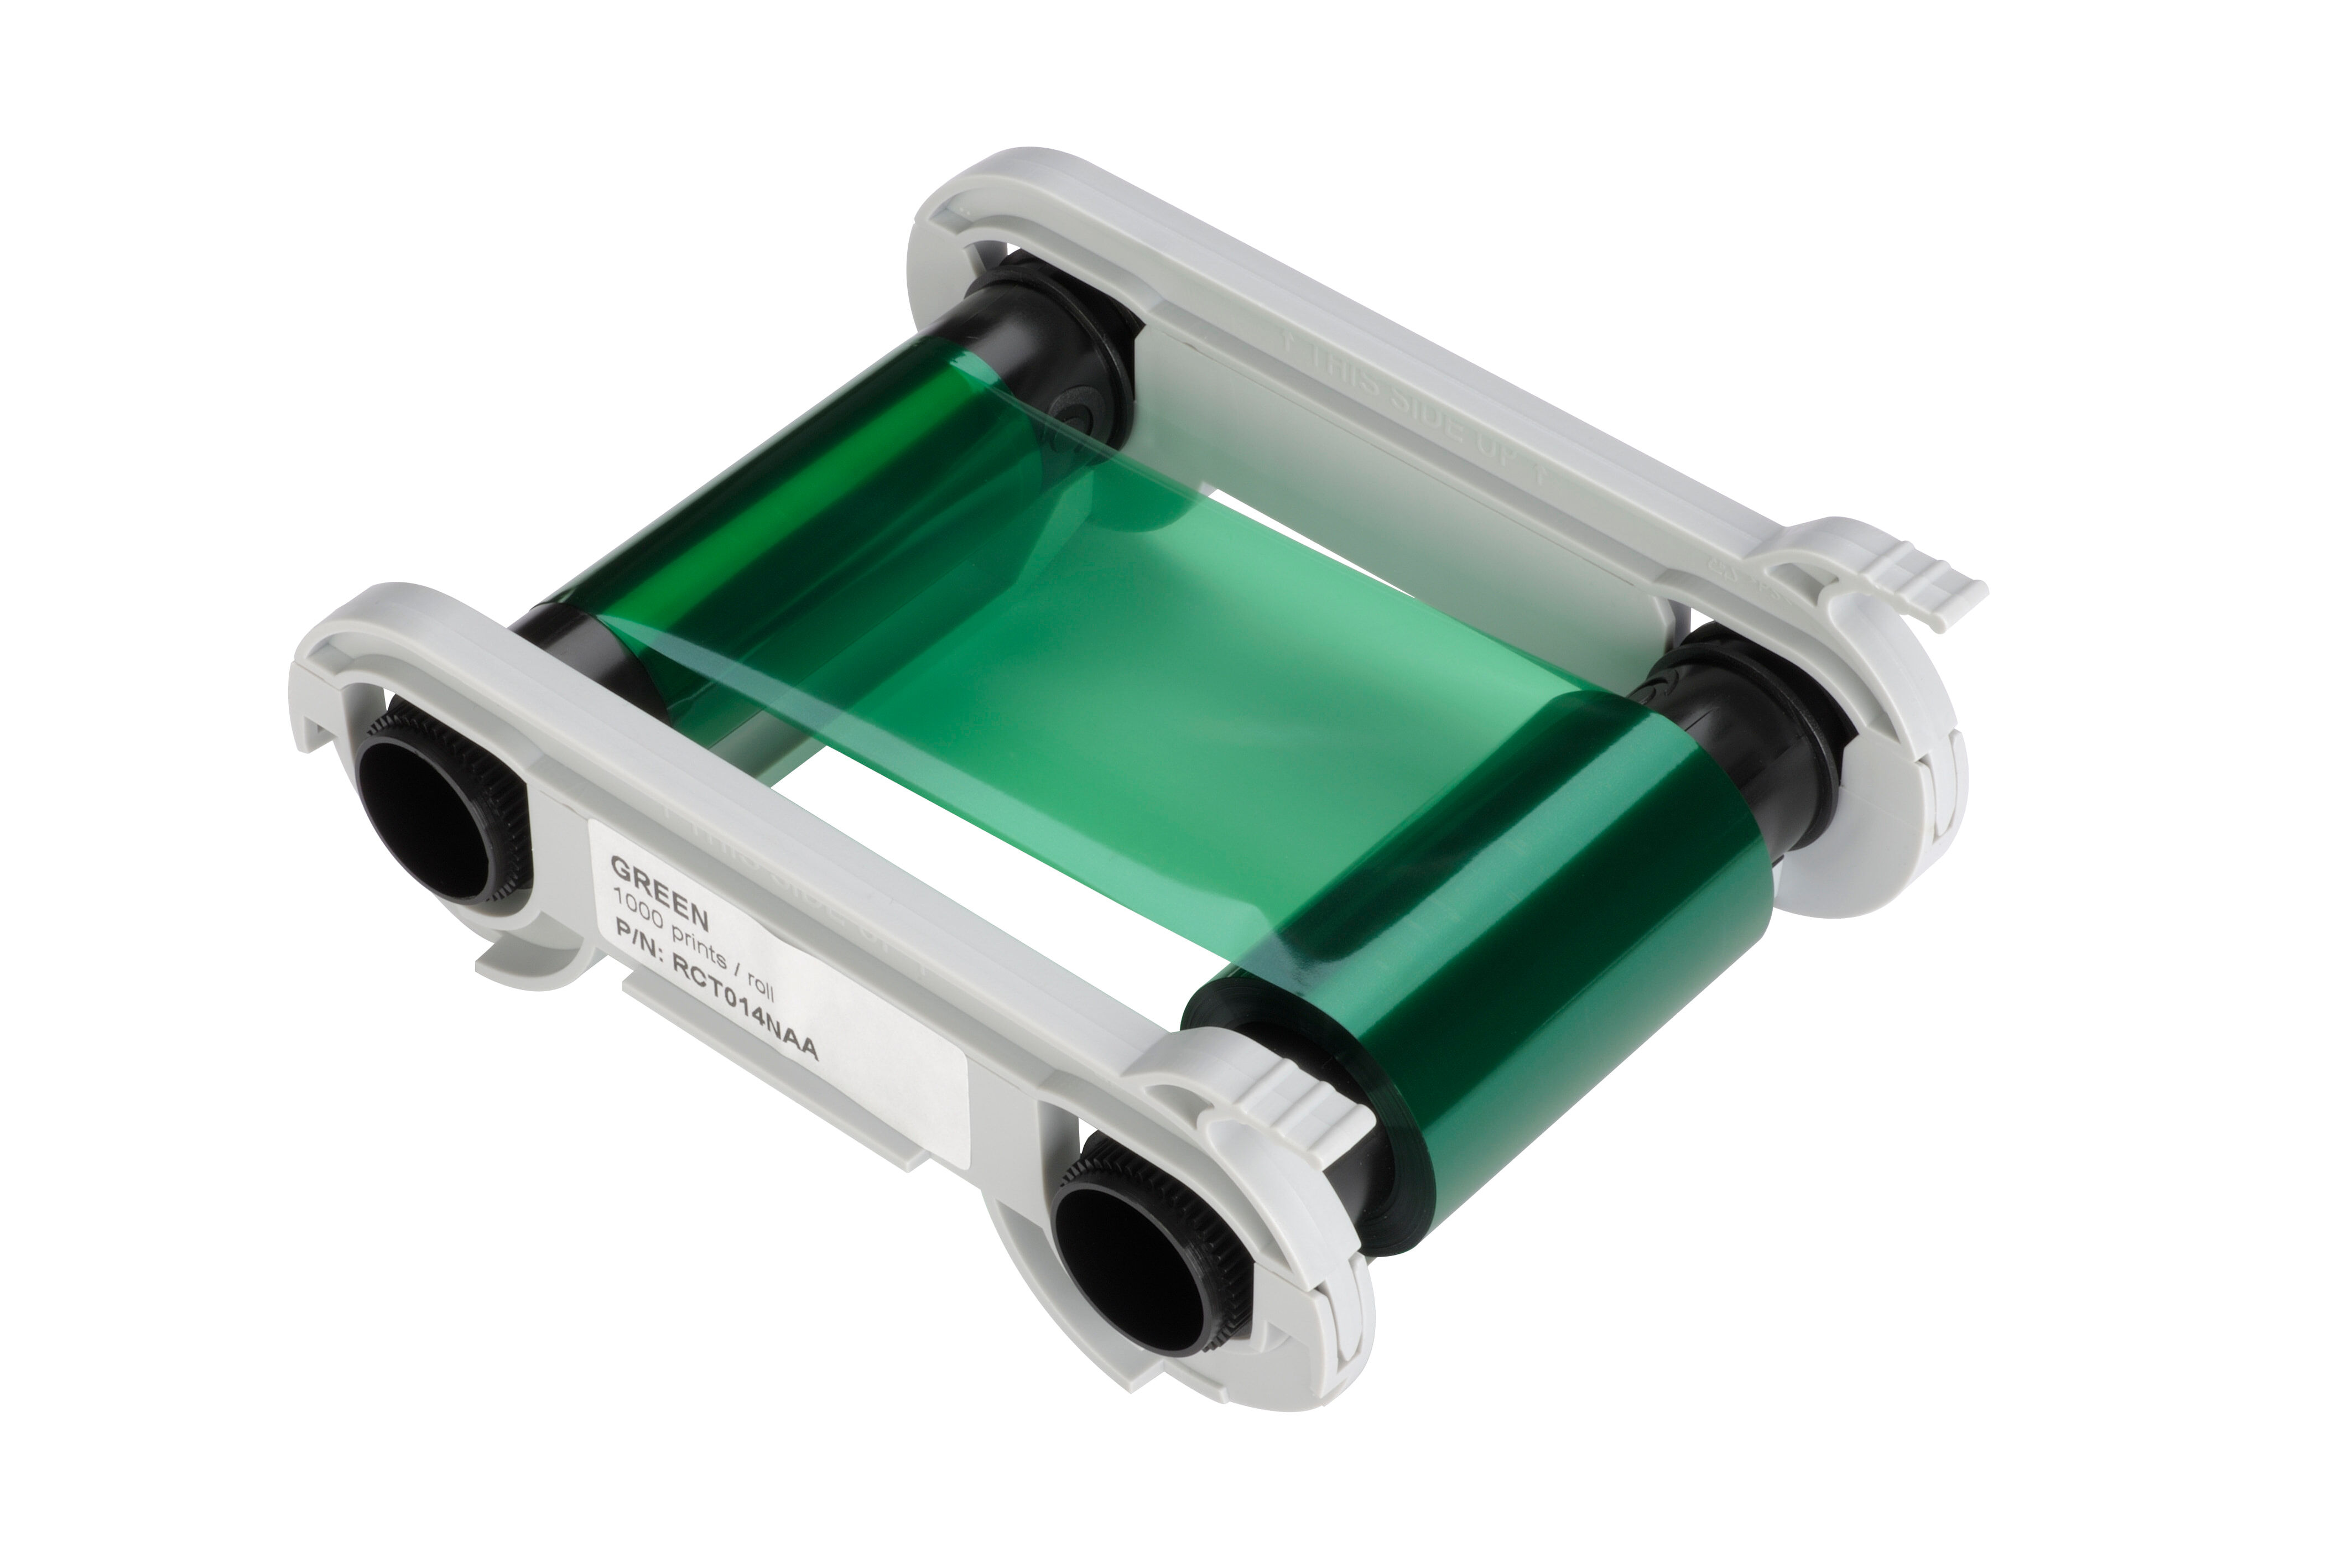 RCT014NAA Green Mono Ribbon for Zenius and Primacy (first generation) Plastic Card Printers